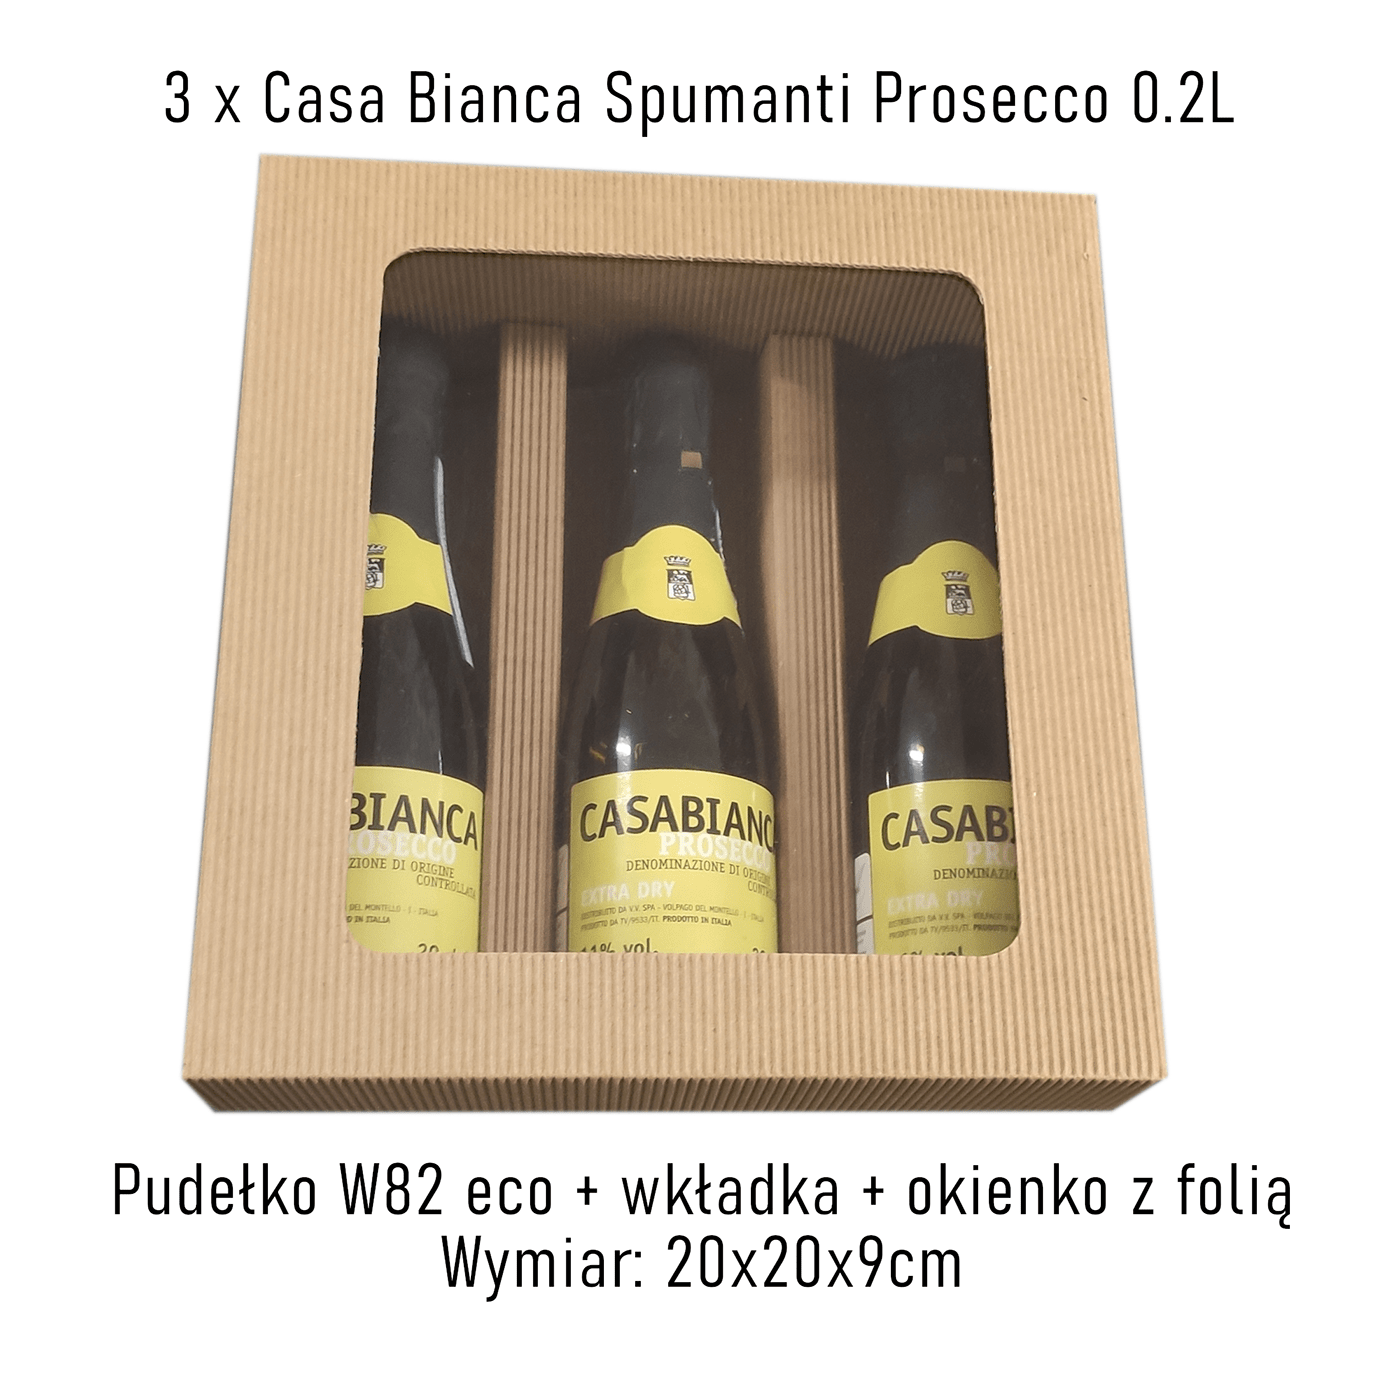 bottle Packaging Prosecco